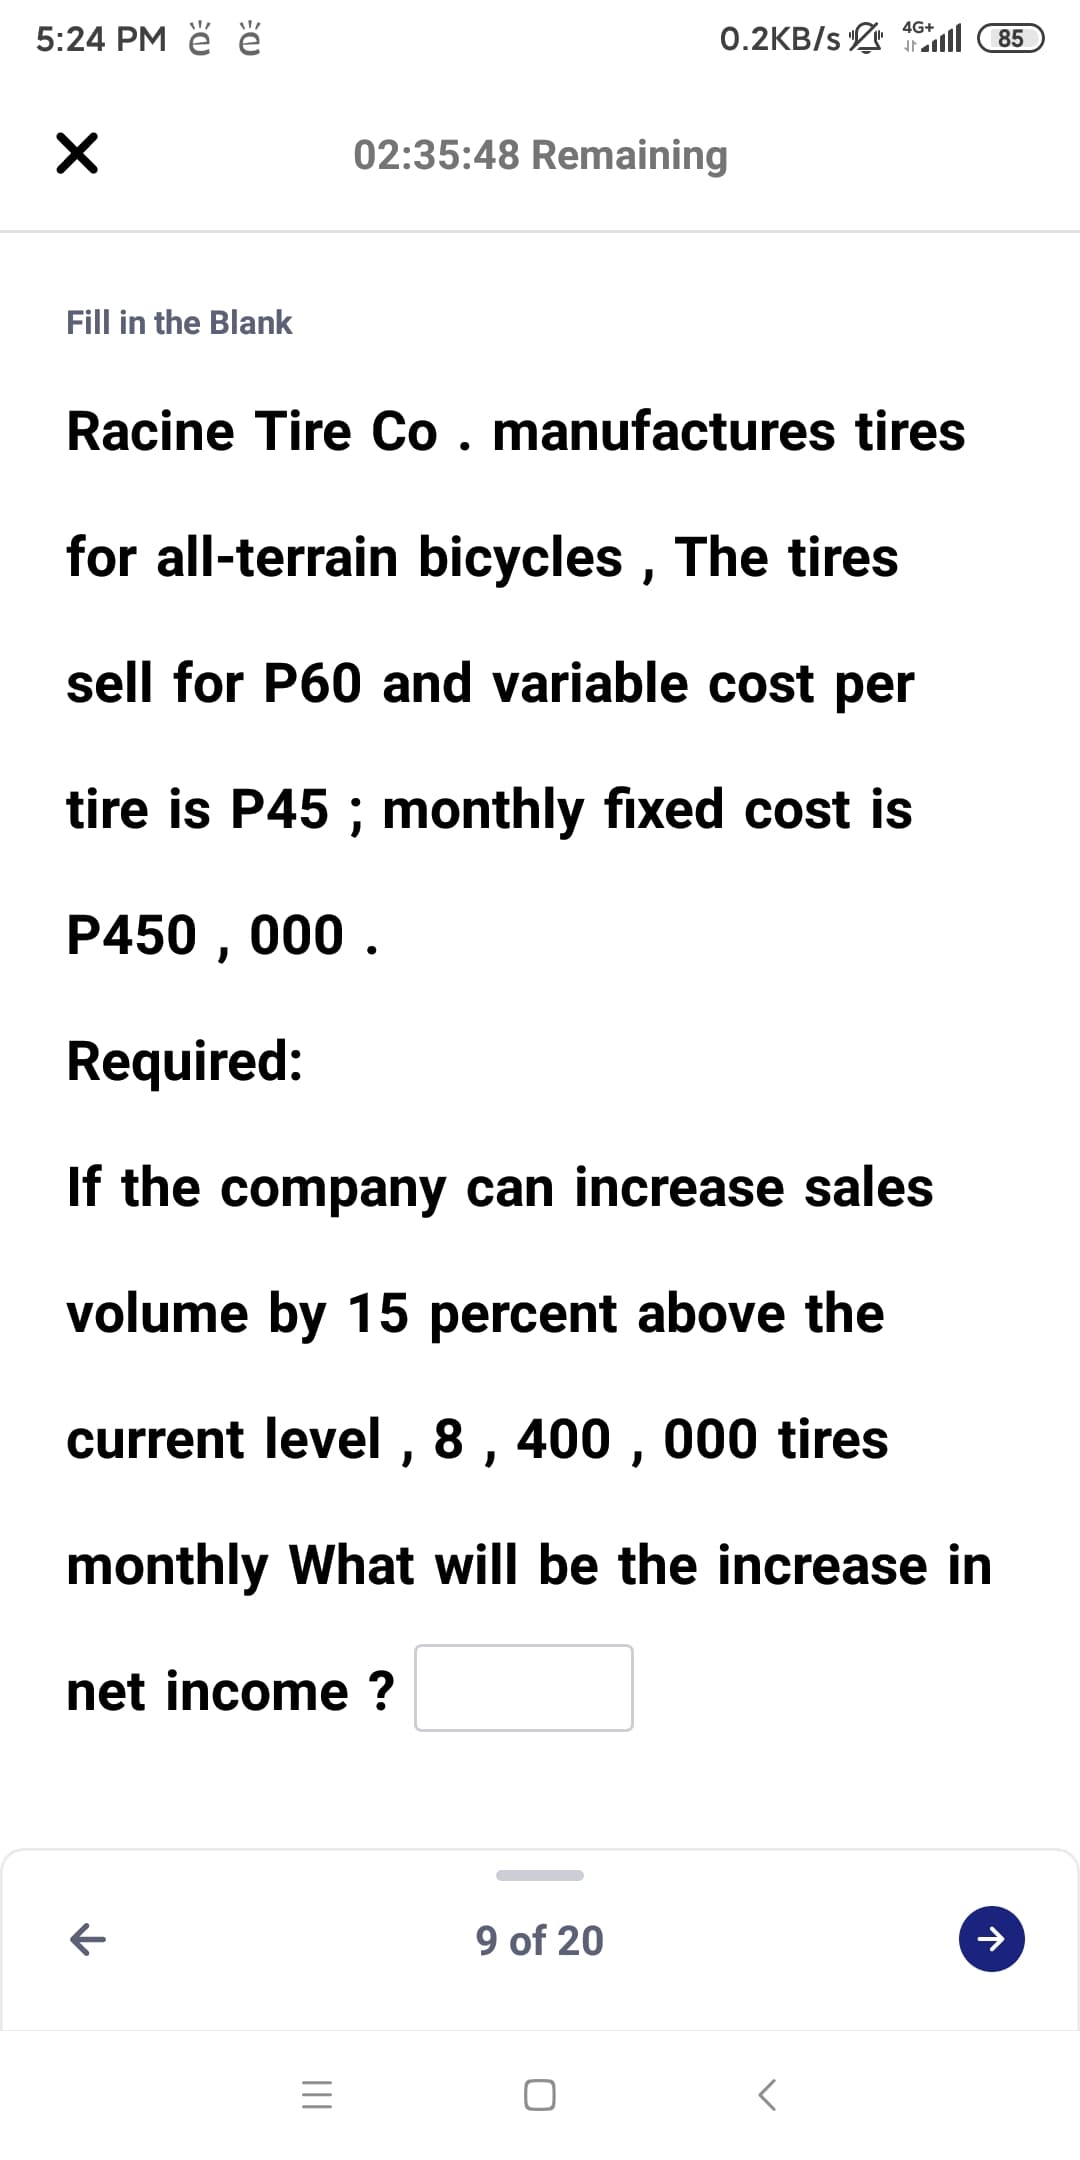 5:24 PM ě ě
0.2KB/s ll
4G+
85
02:35:48 Remaining
Fill in the Blank
Racine Tire Co. manufactures tires
for all-terrain bicycles , The tires
sell for P60 and variable cost per
tire is P45 ; monthly fixed cost is
P450 , 000 .
Required:
If the company can increase sales
volume by 15 percent above the
current level , 8 , 400 , 000 tires
monthly What will be the increase in
net income ?
9 of 20
レ
